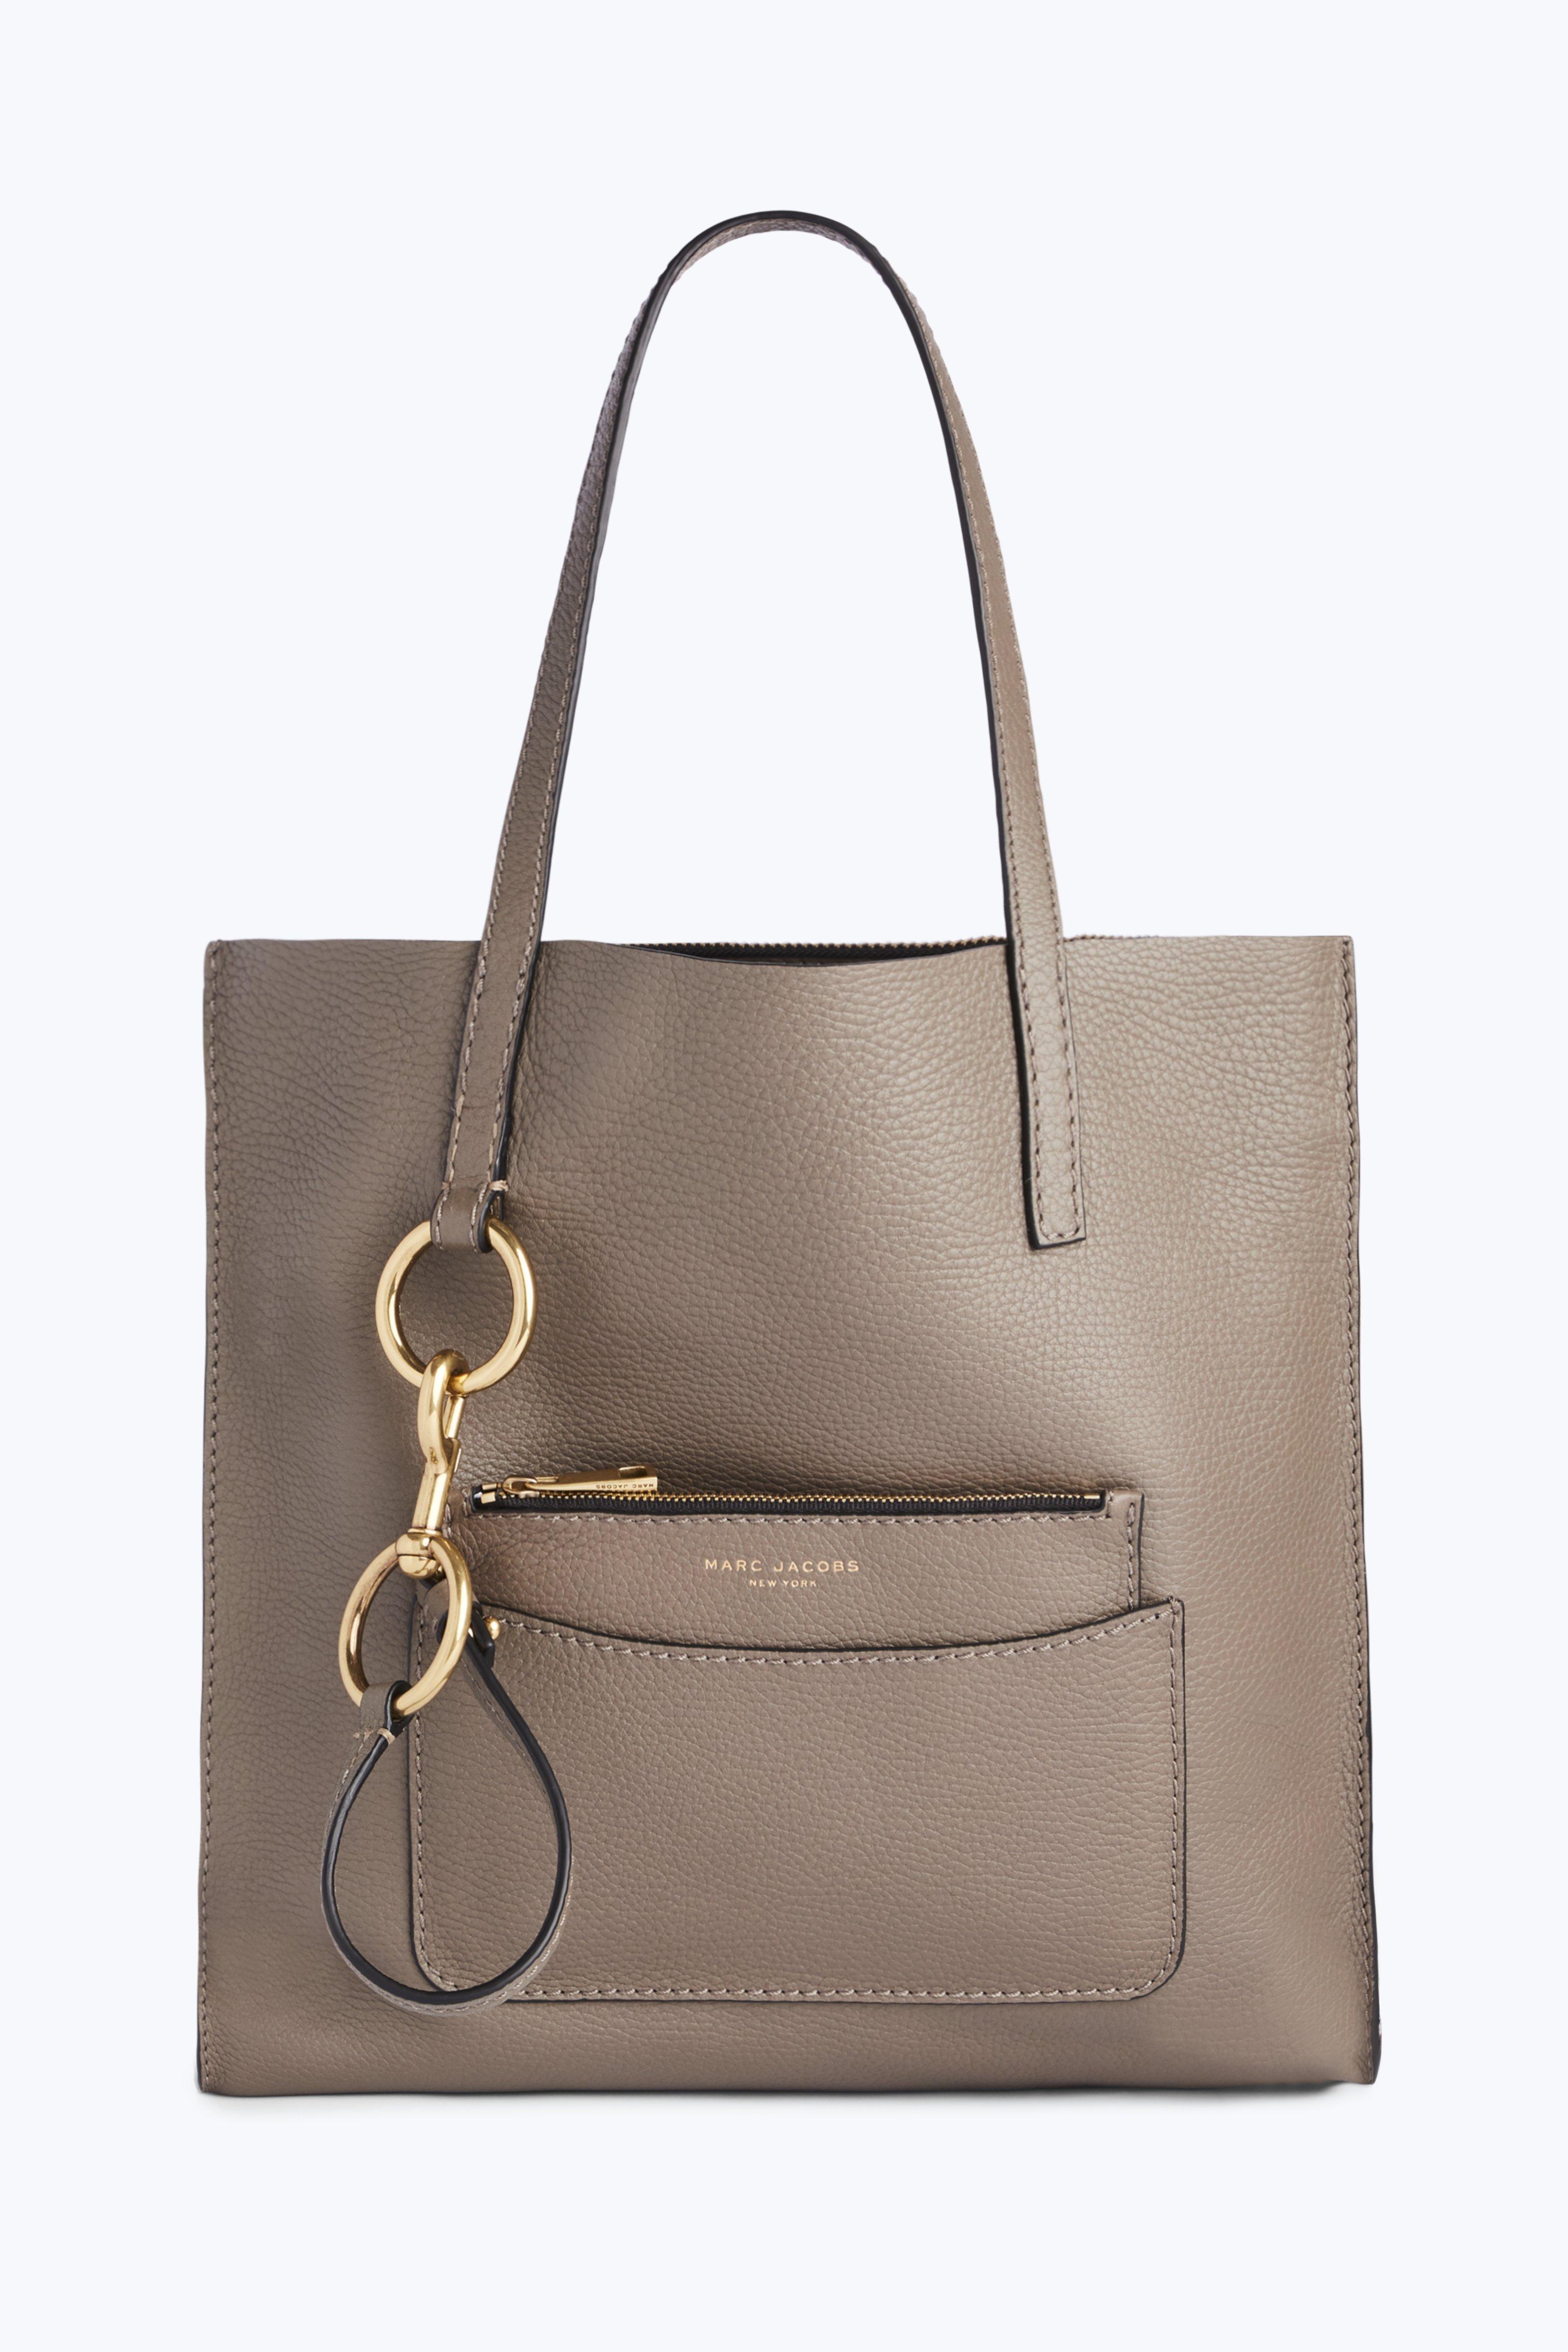 Lyst - Marc Jacobs The Bold Grind Shopper Tote Bag